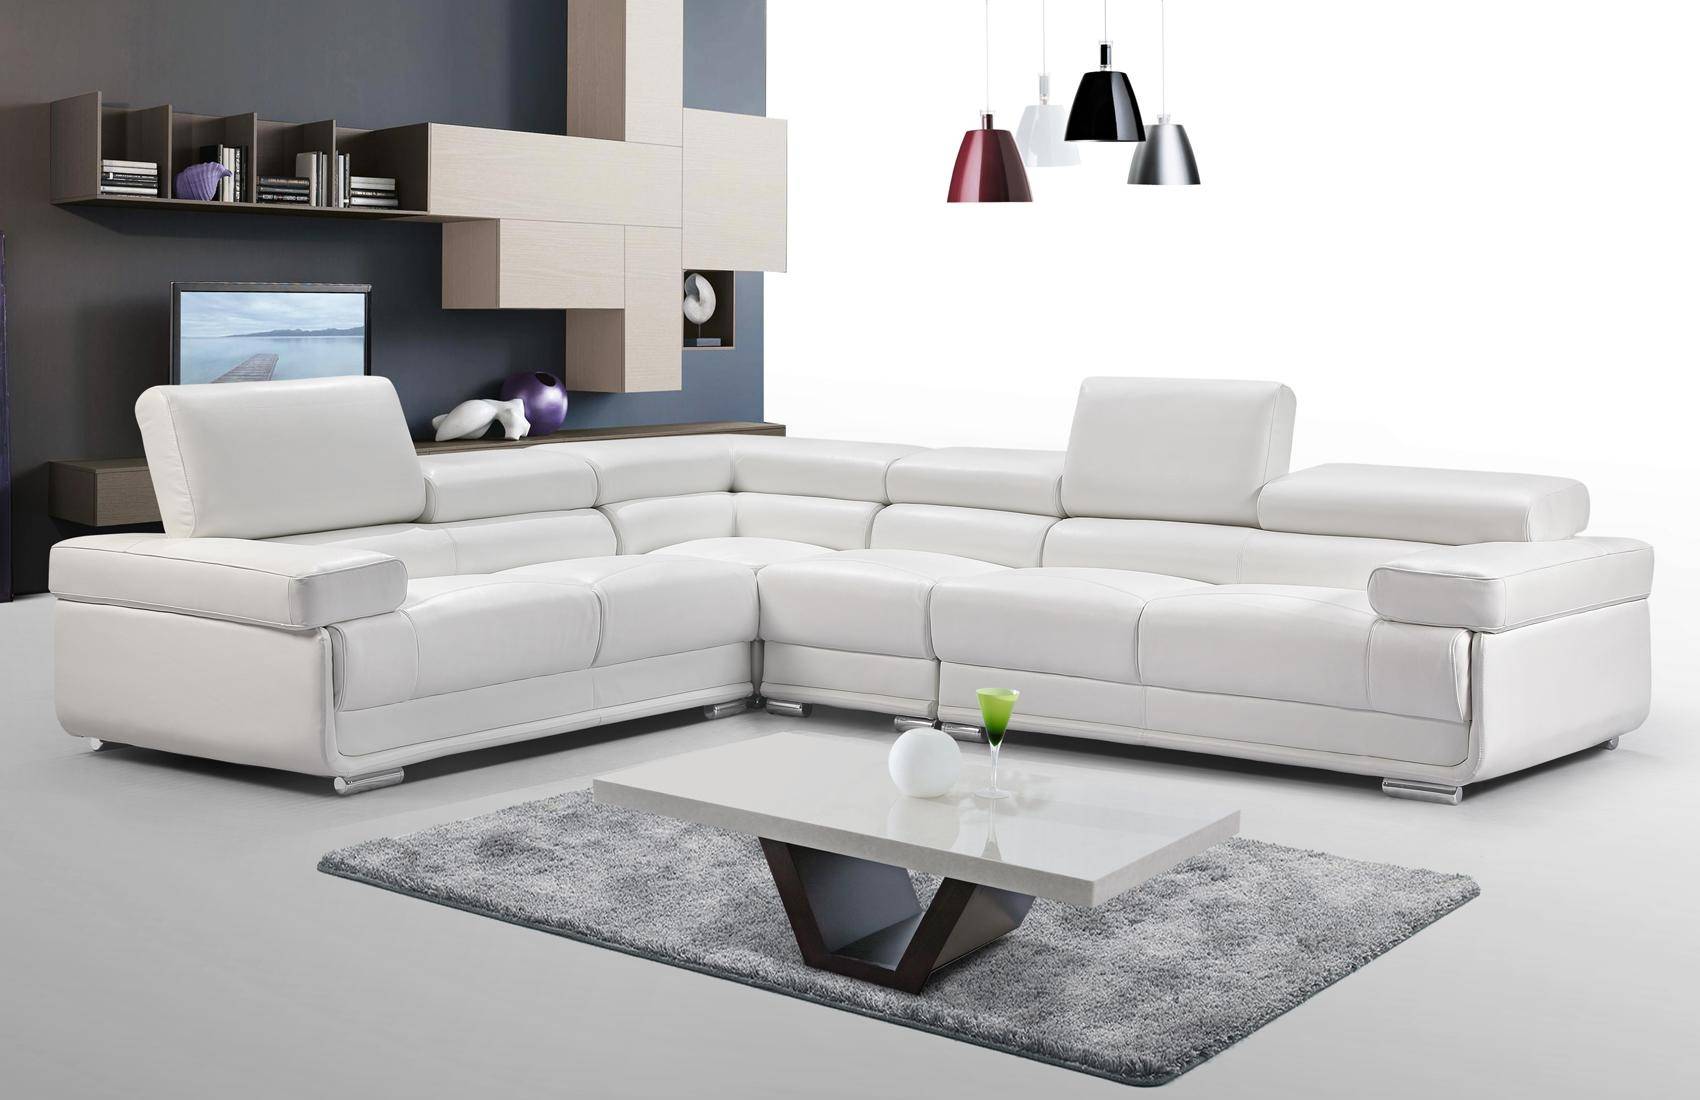 Esf 2119 Sectional Sofa In White, White Leather Contemporary Sectional